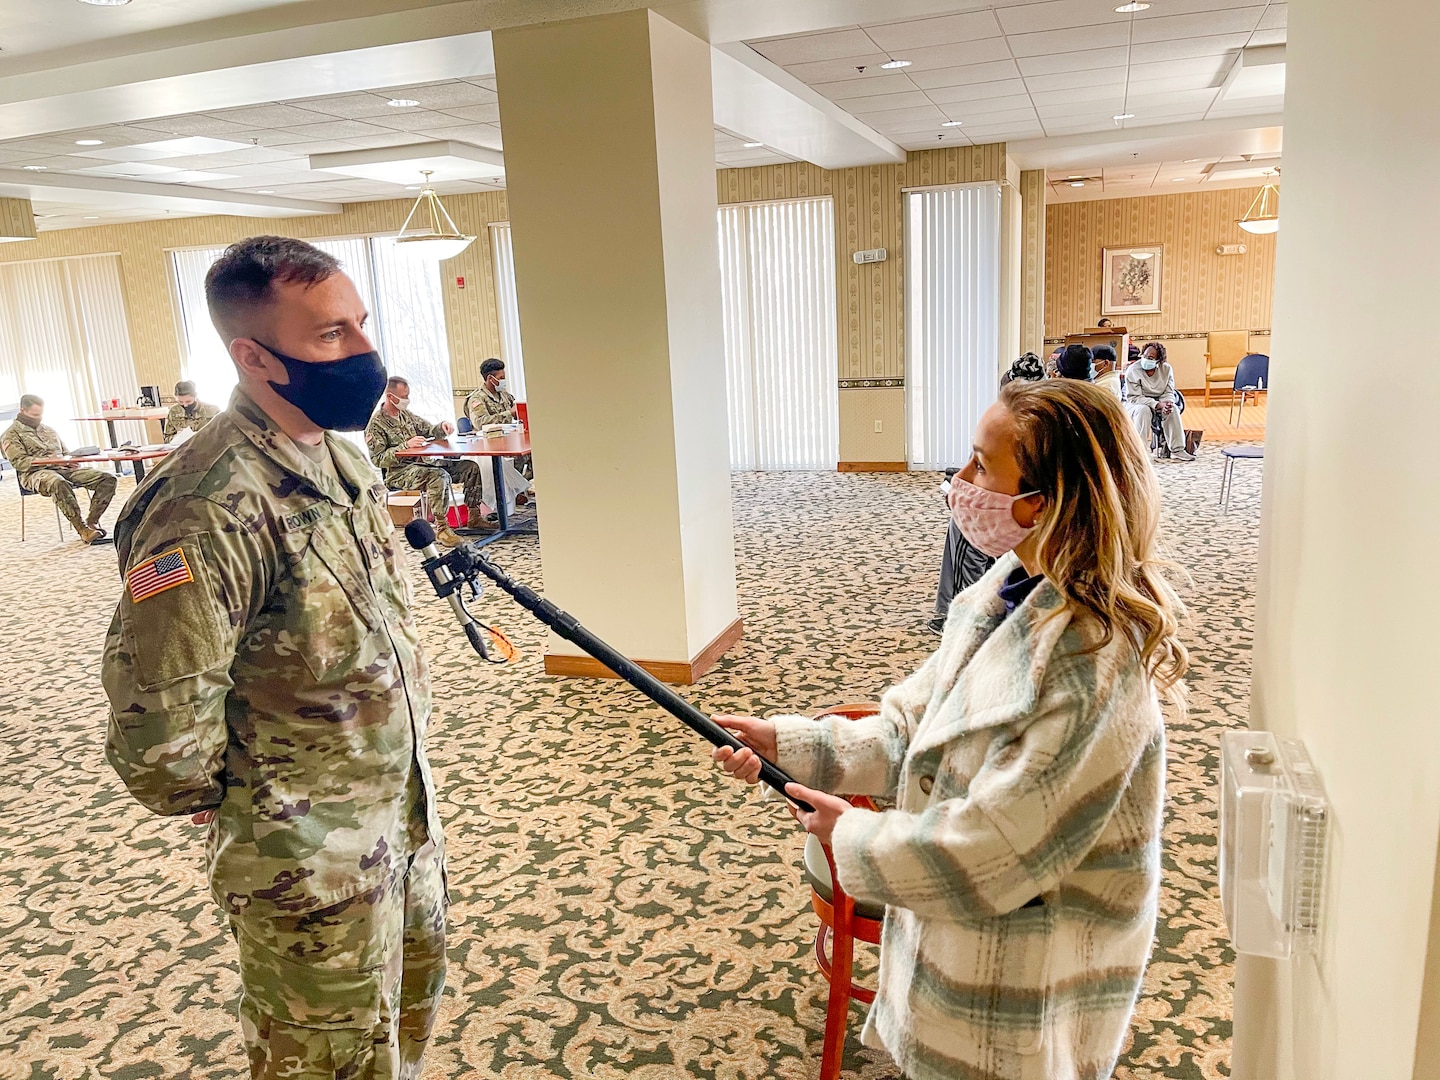 Missouri Army National Guard Staff Sgt. Jeremy Brown, 1107th TASMG, being interviewed by Emma Hogg of KMOV at a targeted vaccination team site in St. Louis on February 24, 2021.